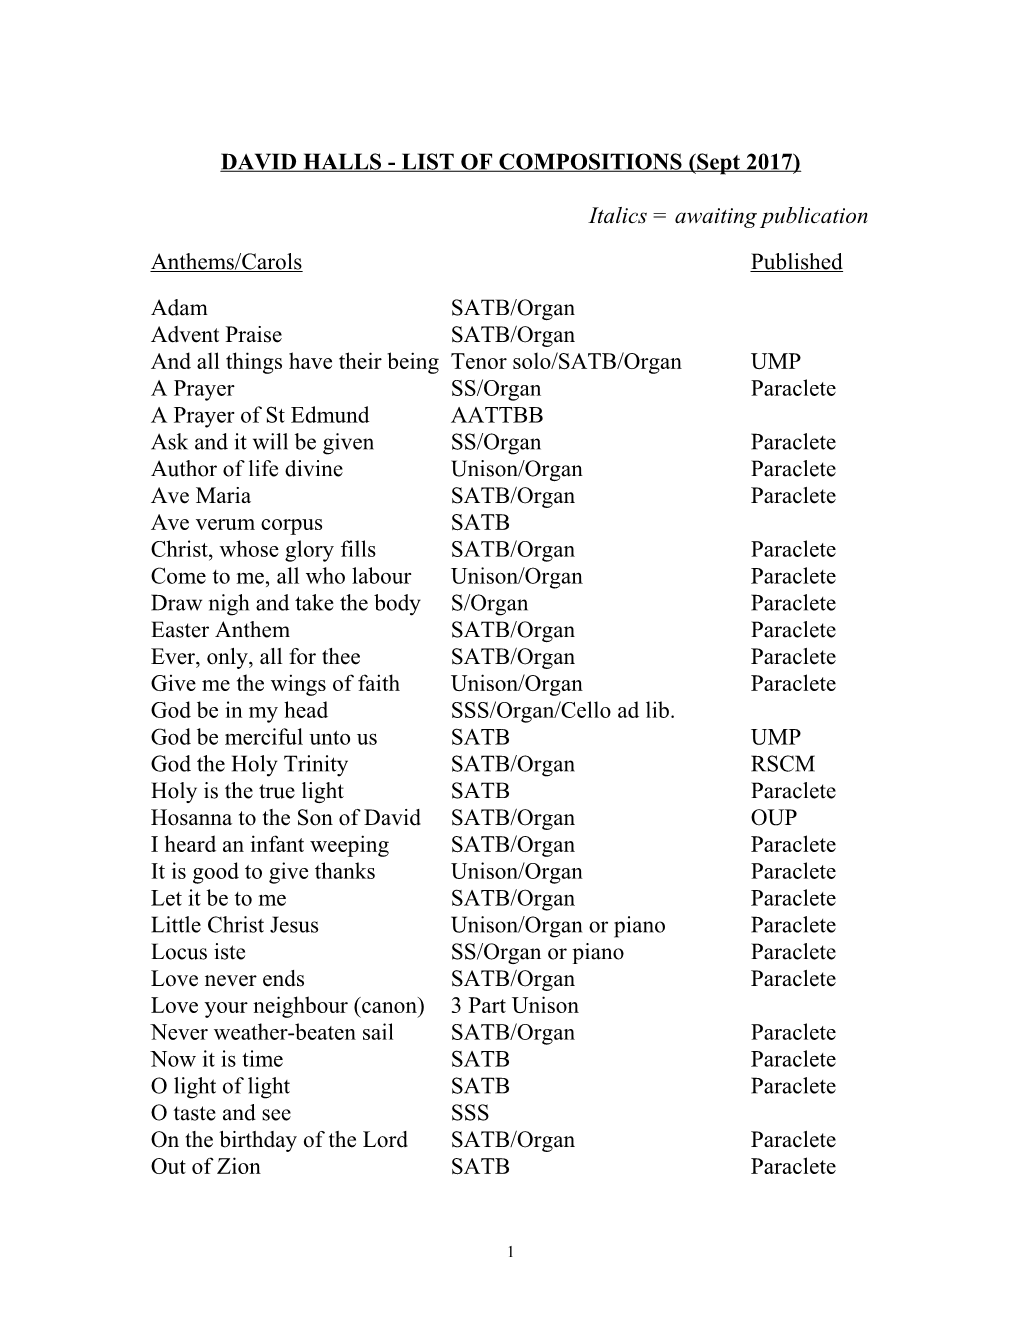 DAVID HALLS - LIST of COMPOSITIONS (May 2003)